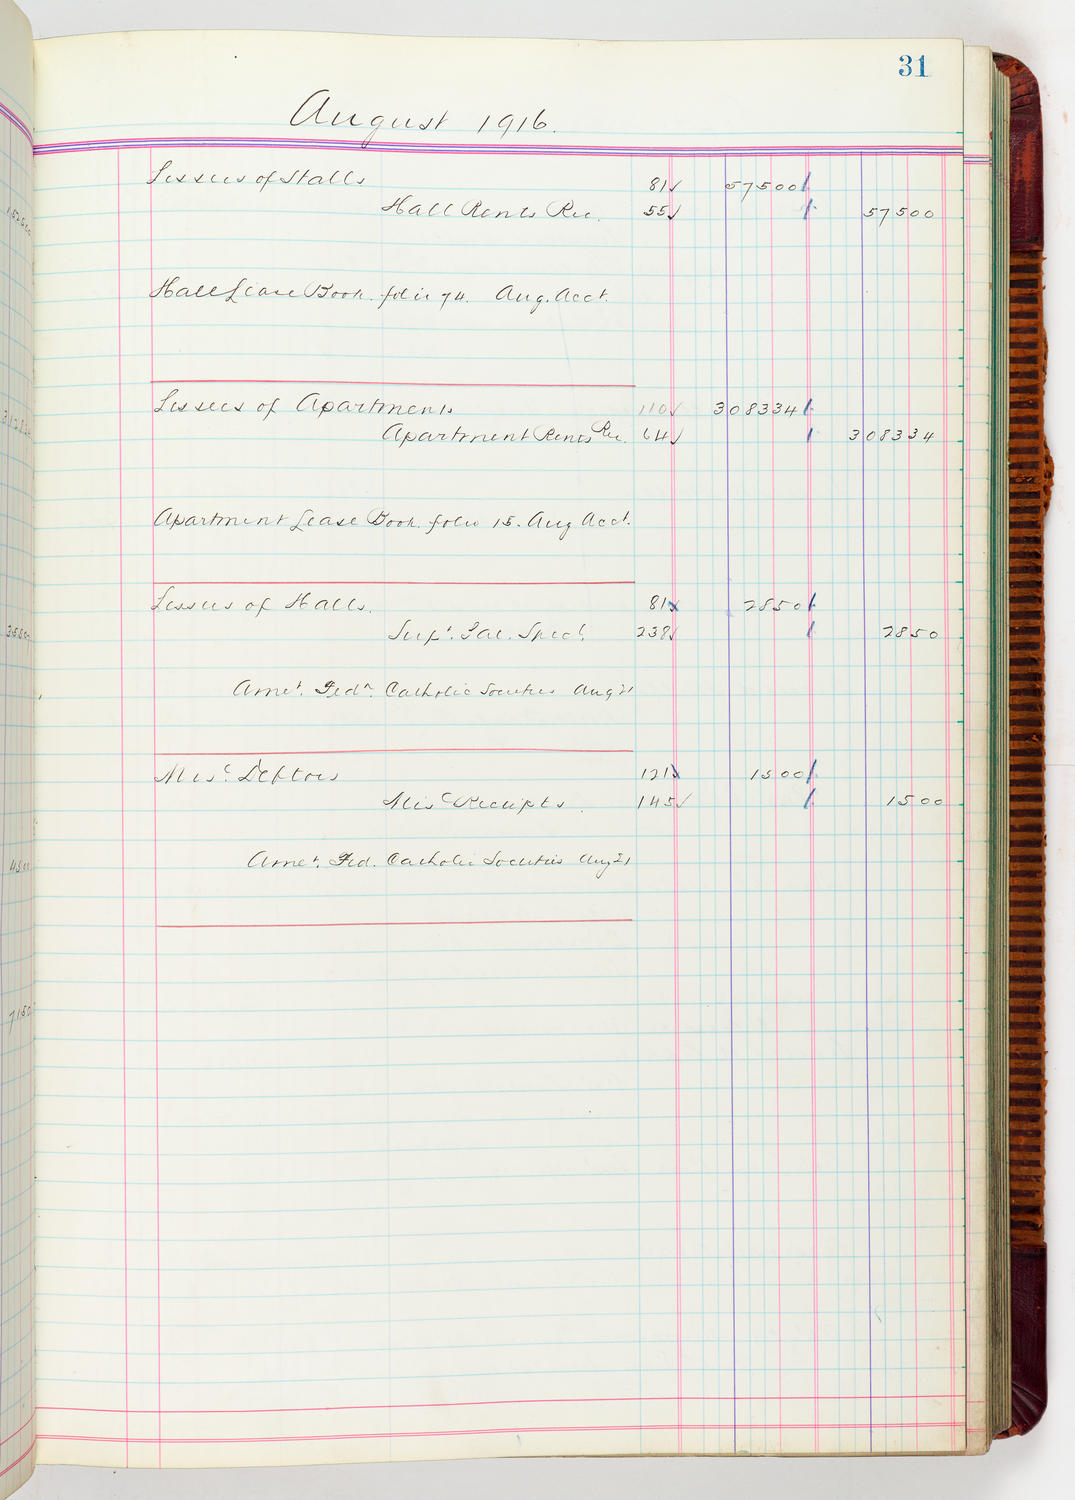 Music Hall Accounting Ledger, volume 5, page 31